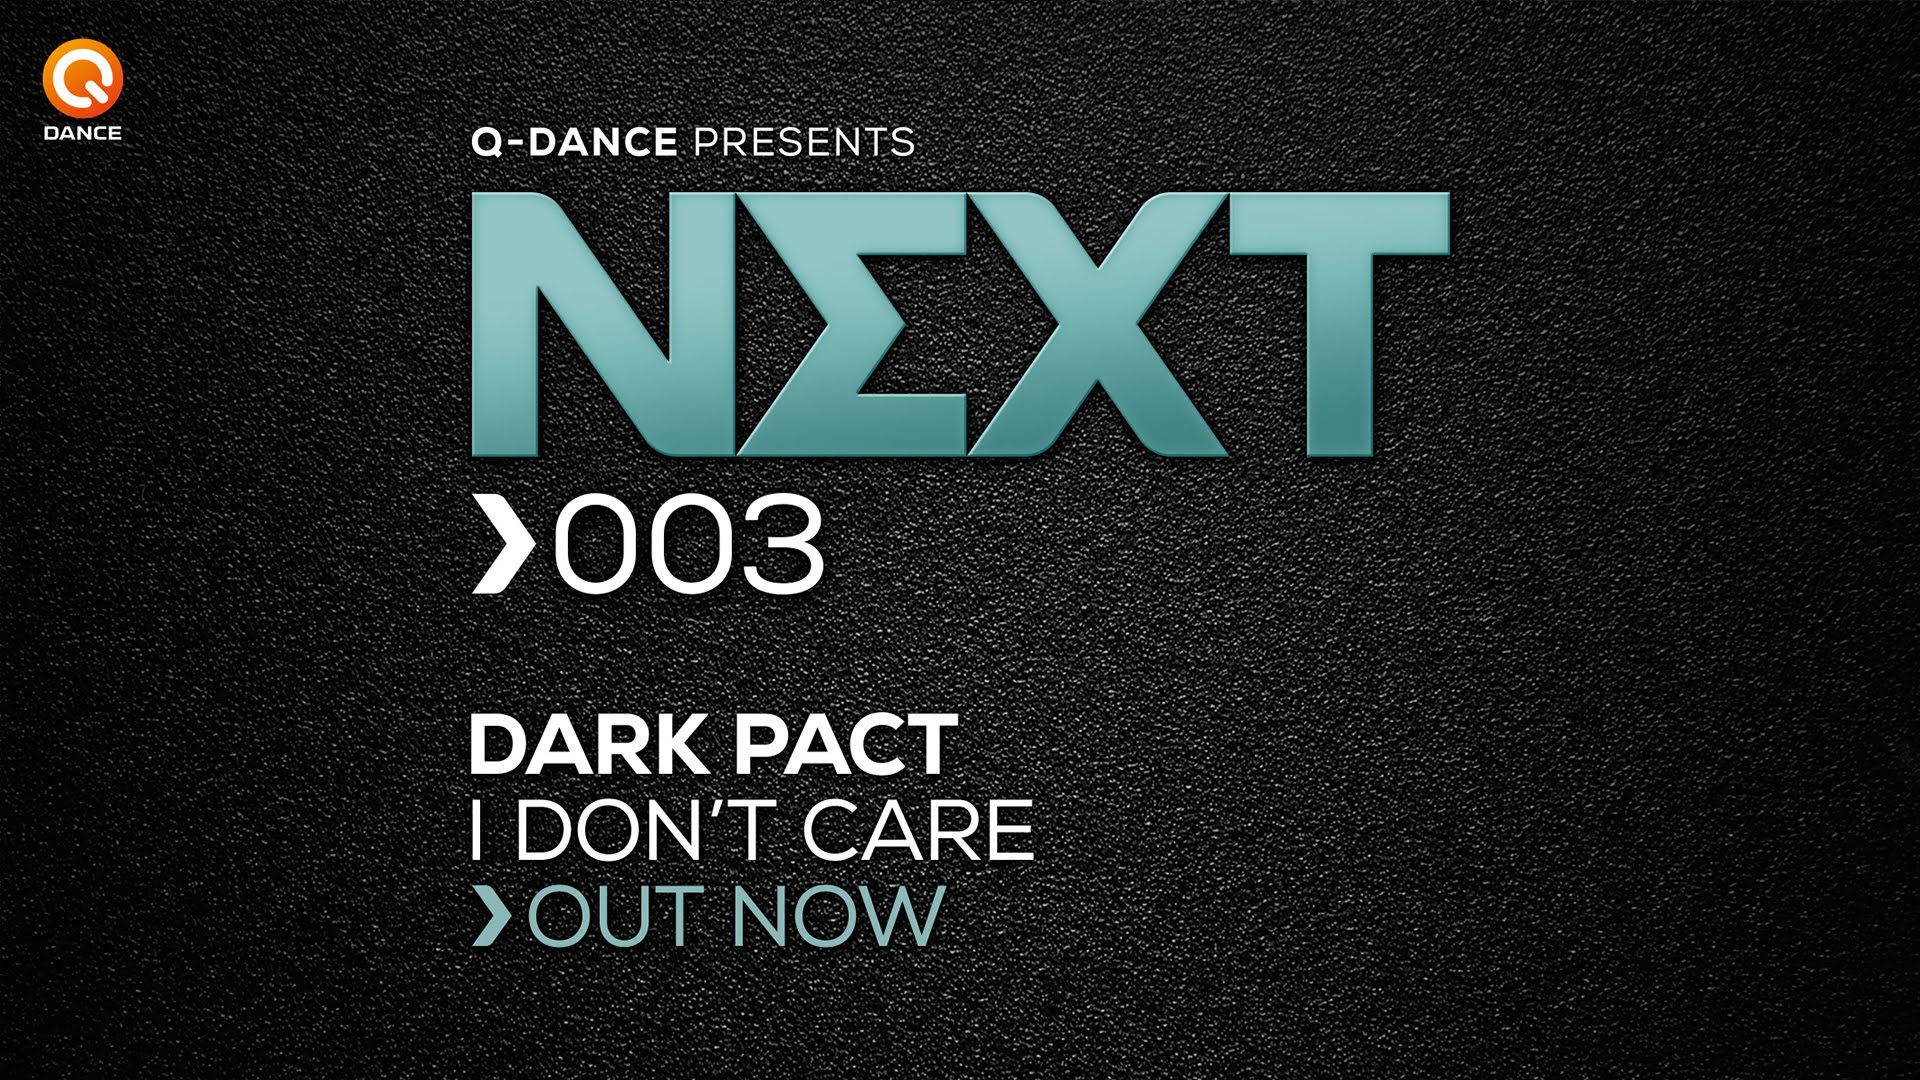 Dark Pact Don't Care [NEXT003]